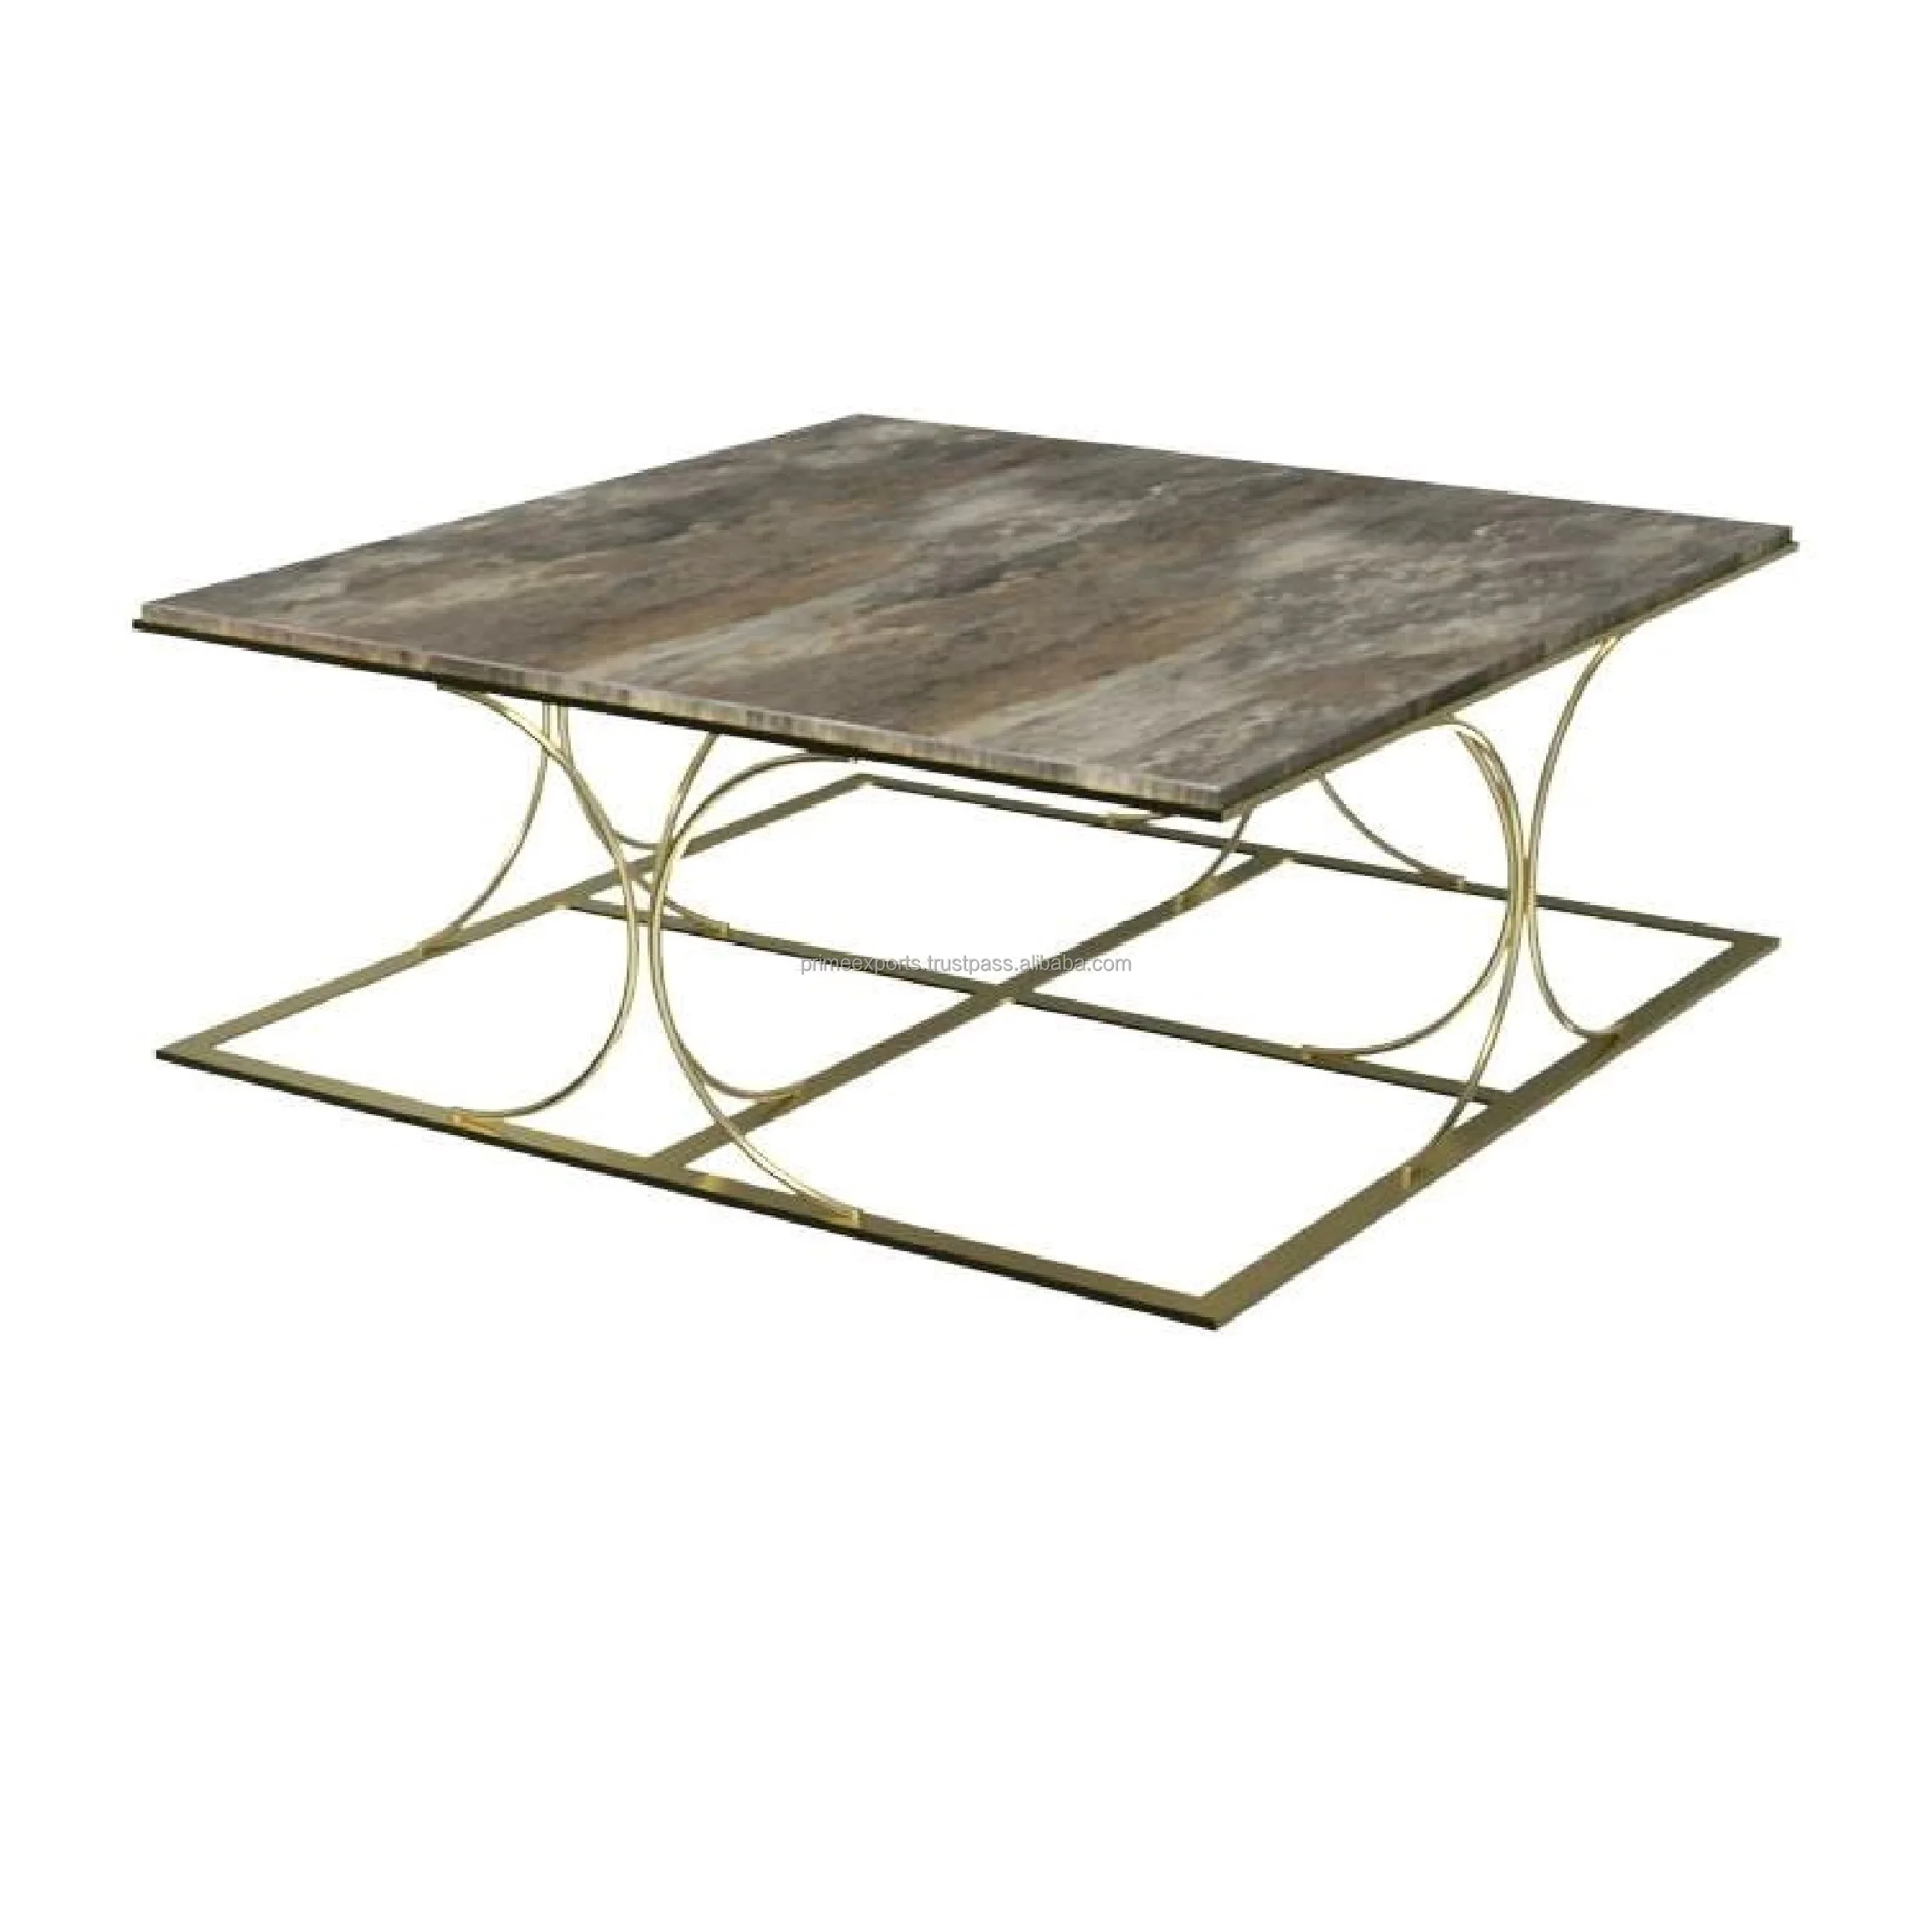 Metal Design Wooden Top Coffee Table Furniture Home Hotels Motels And Restaurant Furniture Interior And Exterior Design Furnitur Buy Scandinavian And European Top Hot Design Modern Metal And Wooden Center Table